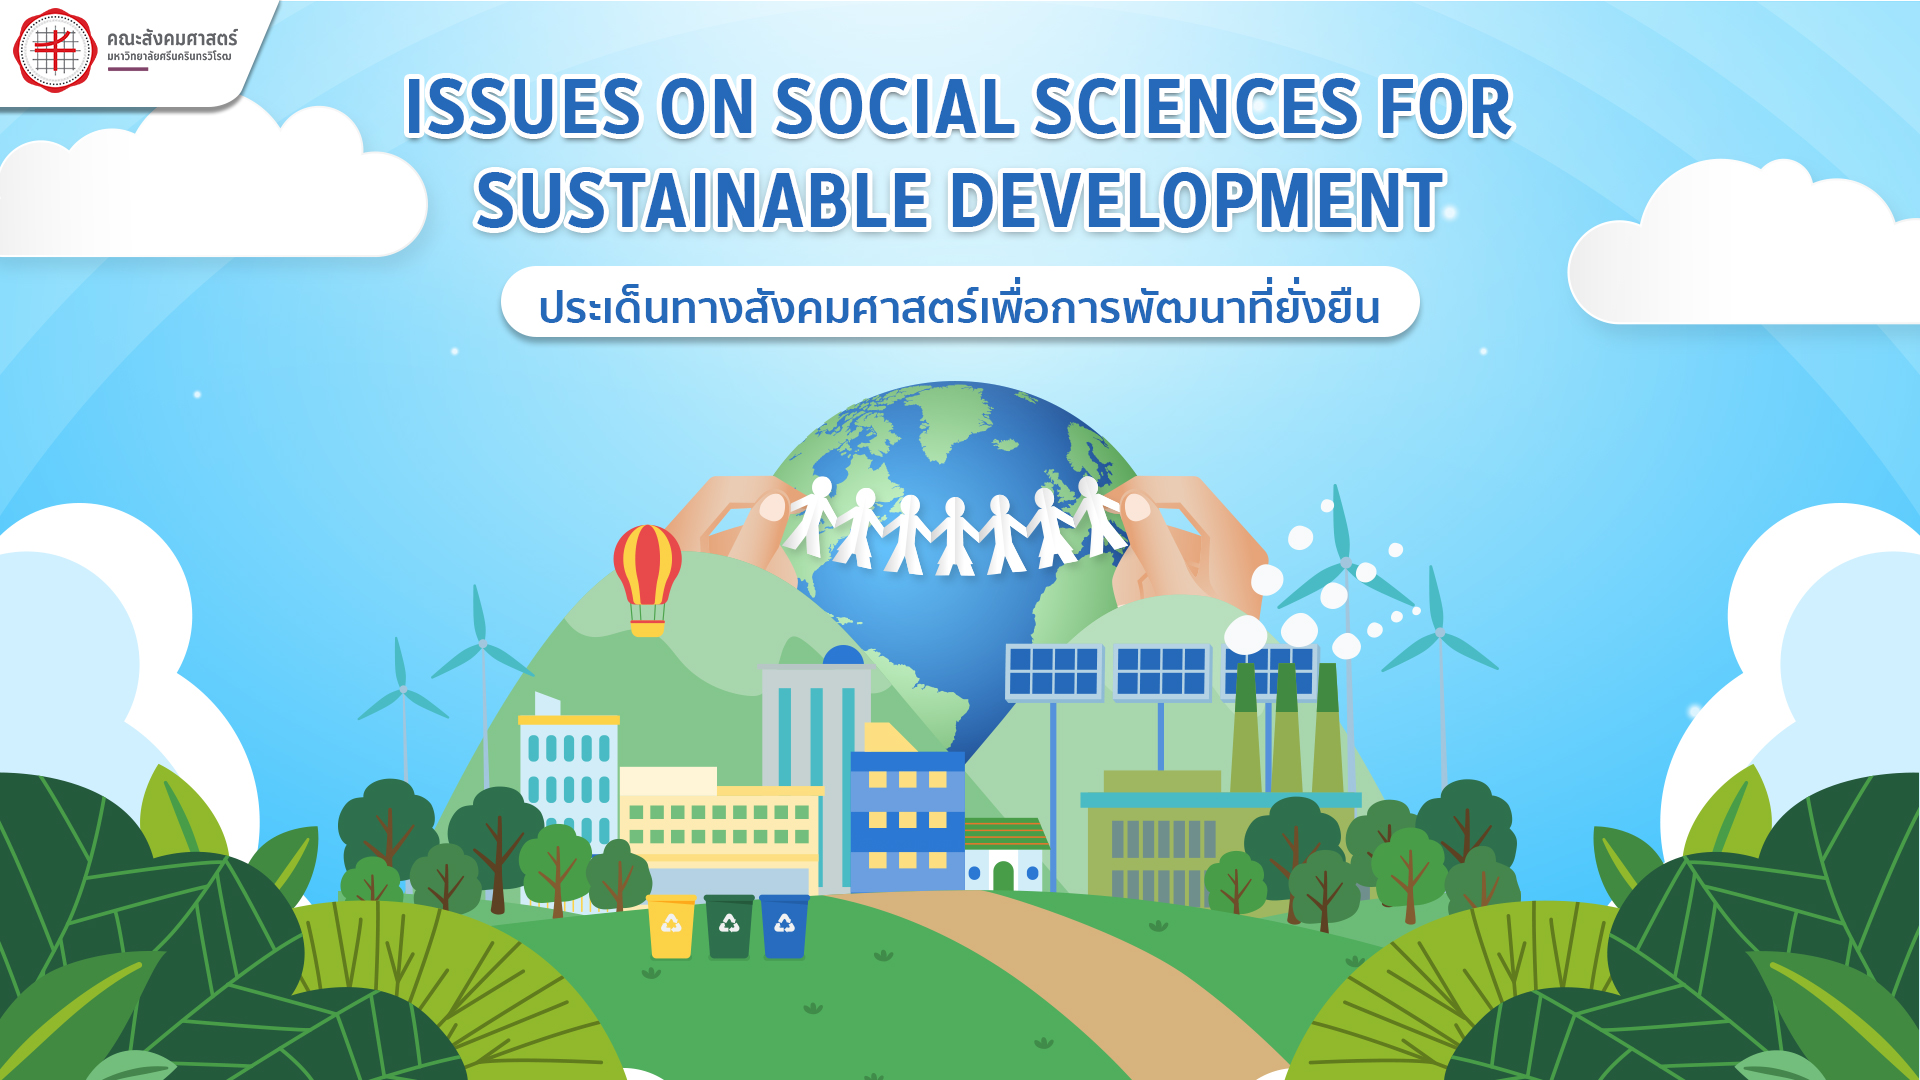 SOC113 Issues on Social Sciences for Sustainable Development